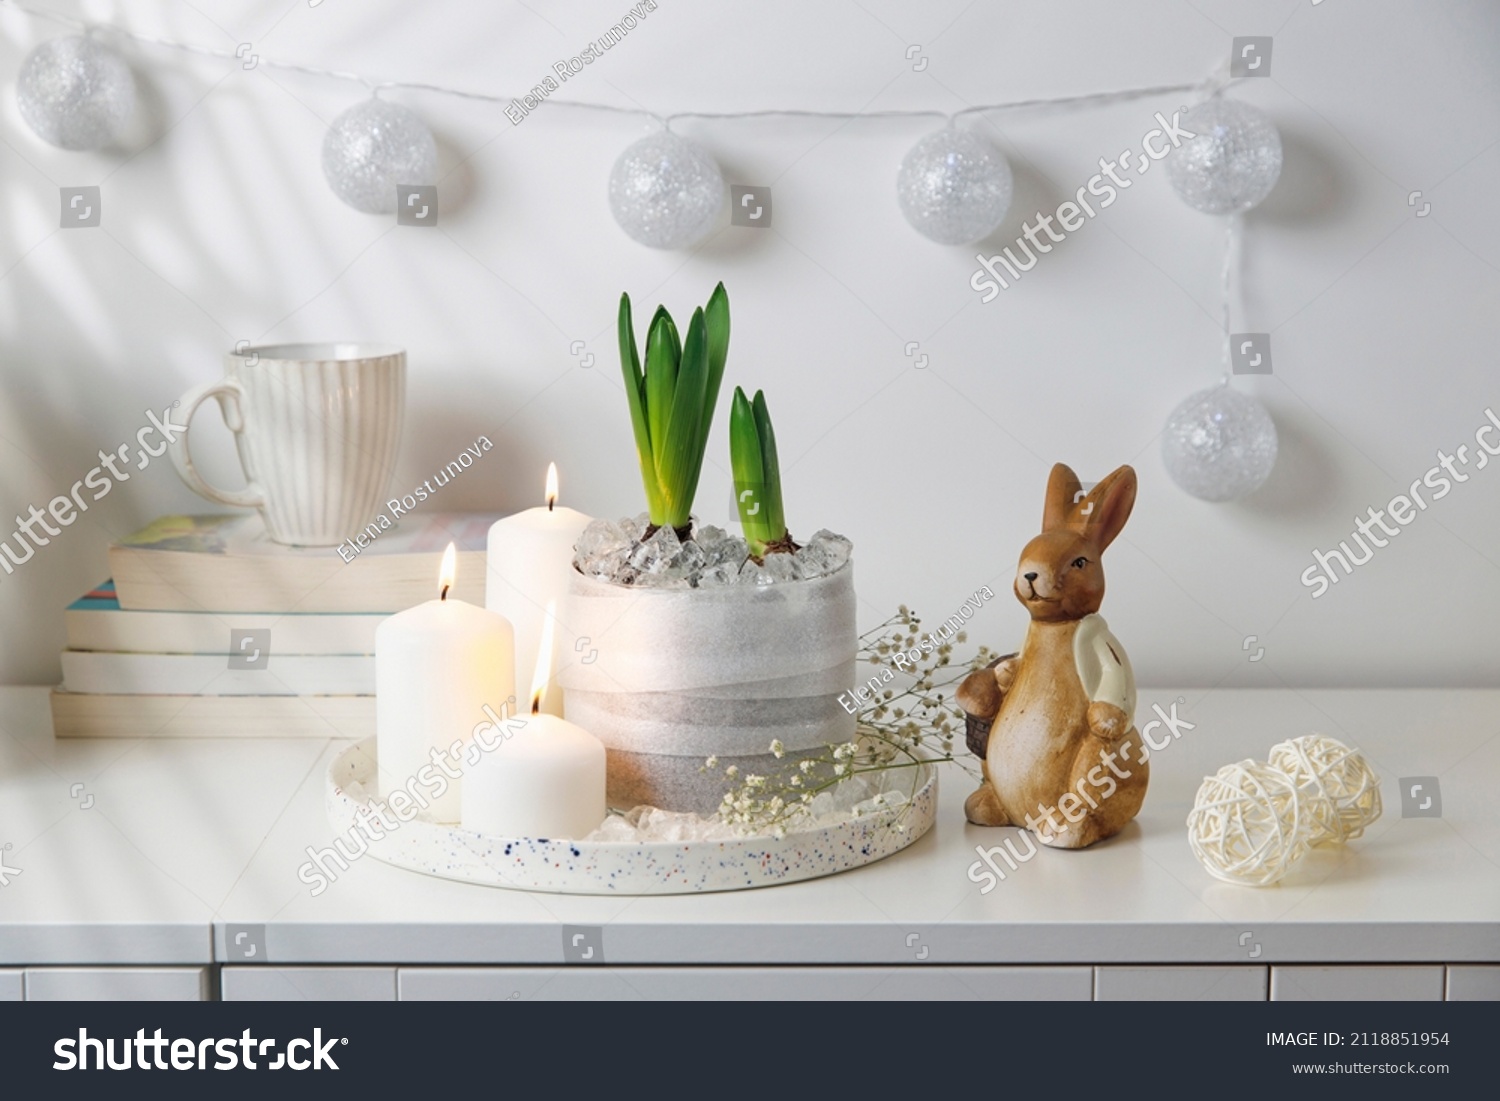 Unblown hyacinths with burning candles on a tray, a stack of books, a mug of tea, a garland of thread on the wall. Easter room decoration. #2118851954